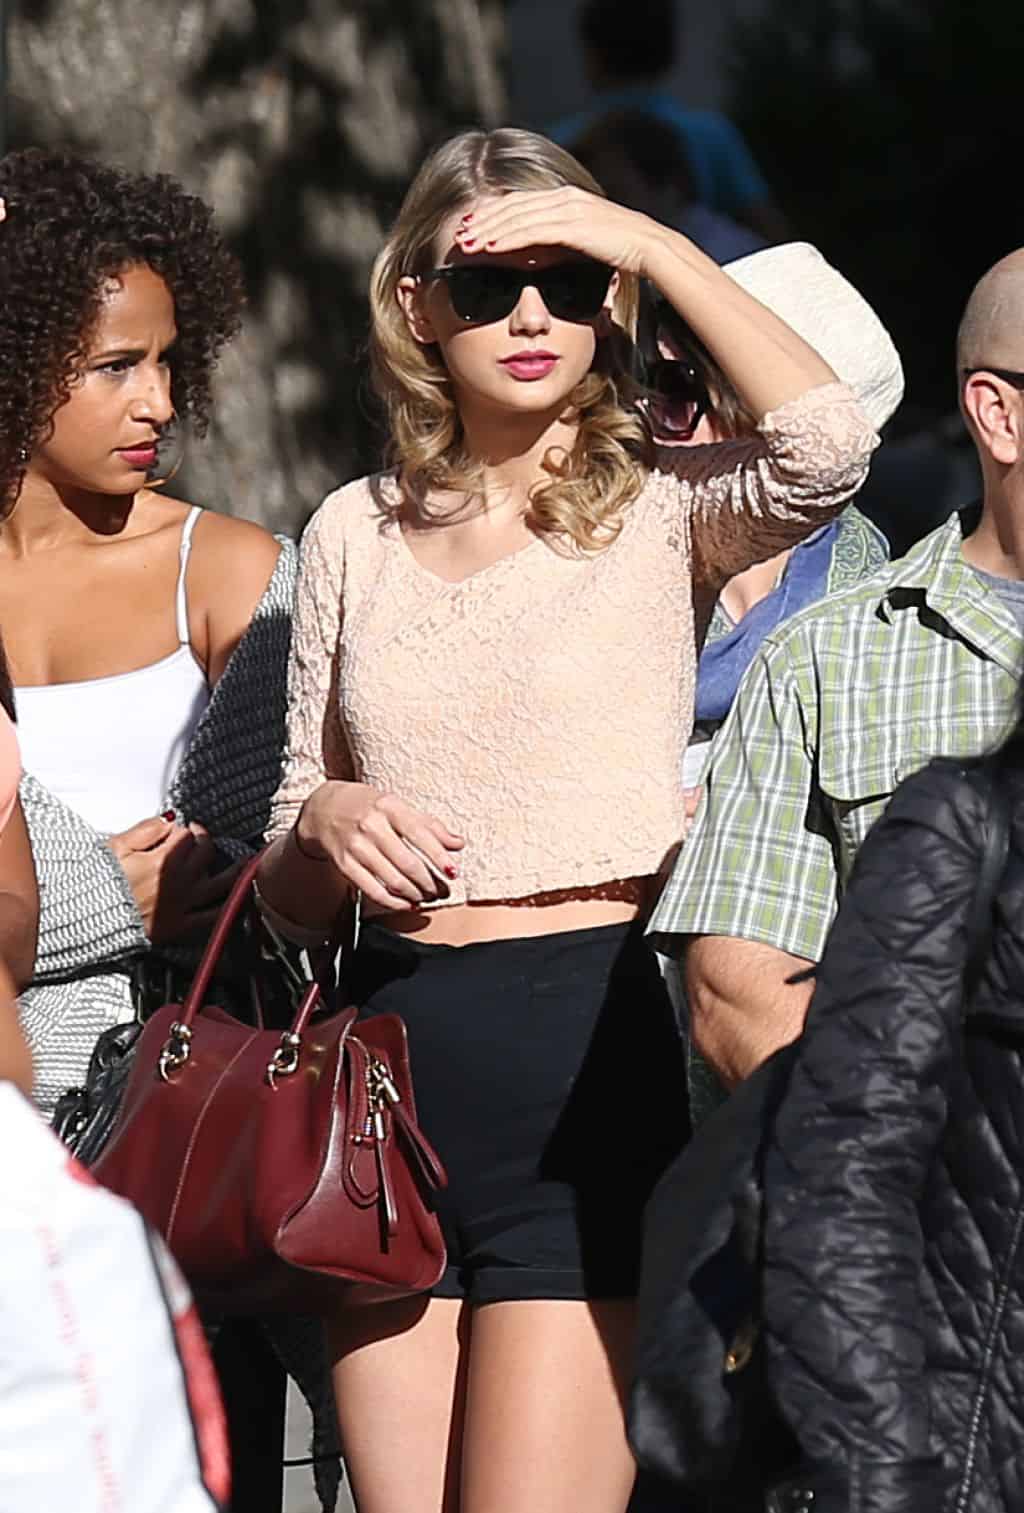 Taylor Swift's Chic Ensemble Puts Her Toned Legs on Display in Melbourne